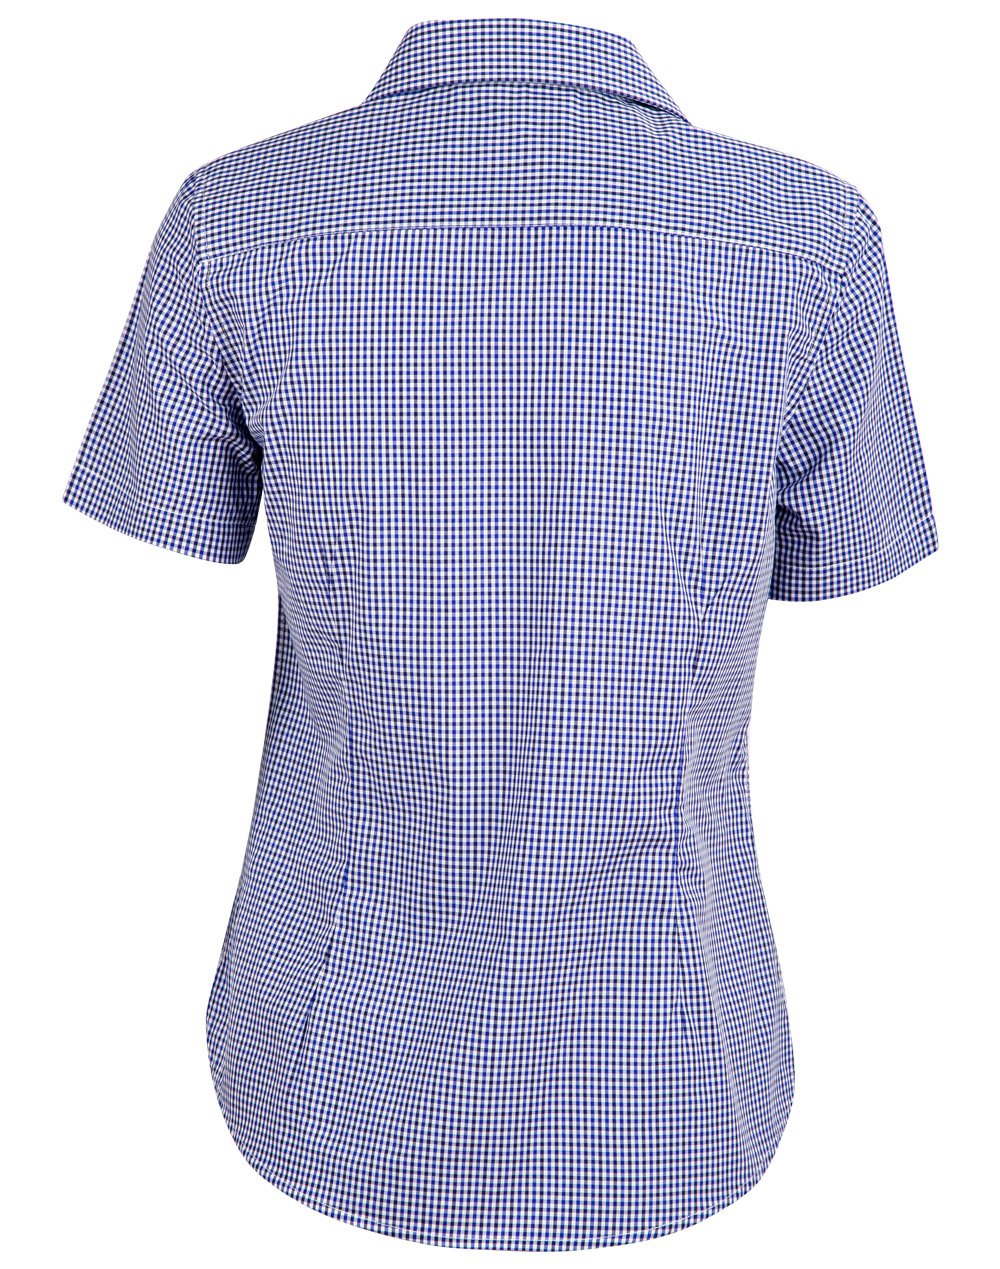 Benchmark M8320s Ladies Two Tone Check S/s Shirt